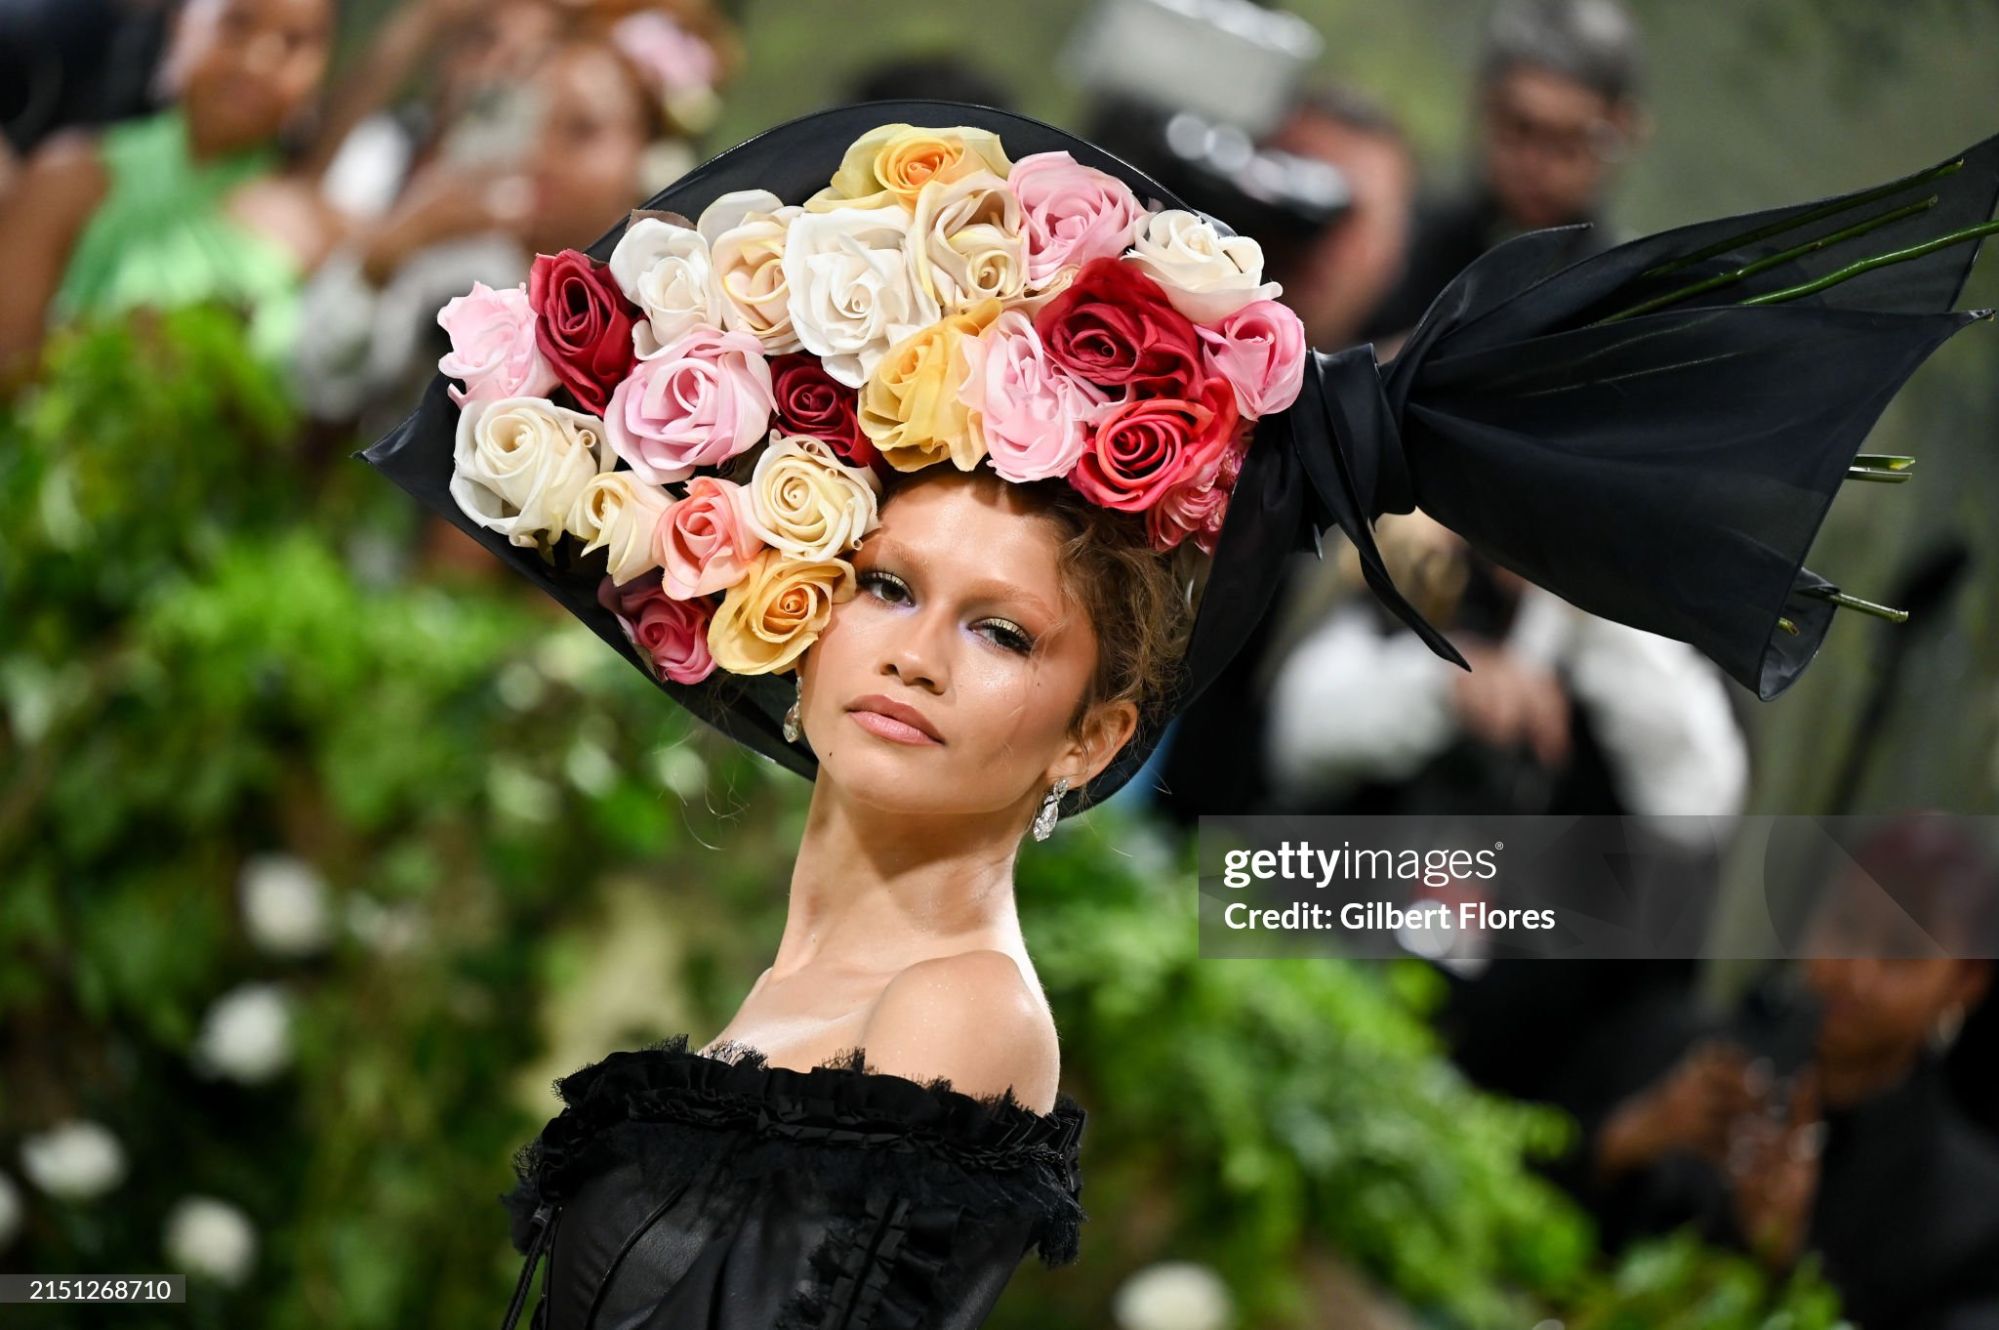 gettyimages-2151268710-2048x2048.jpg